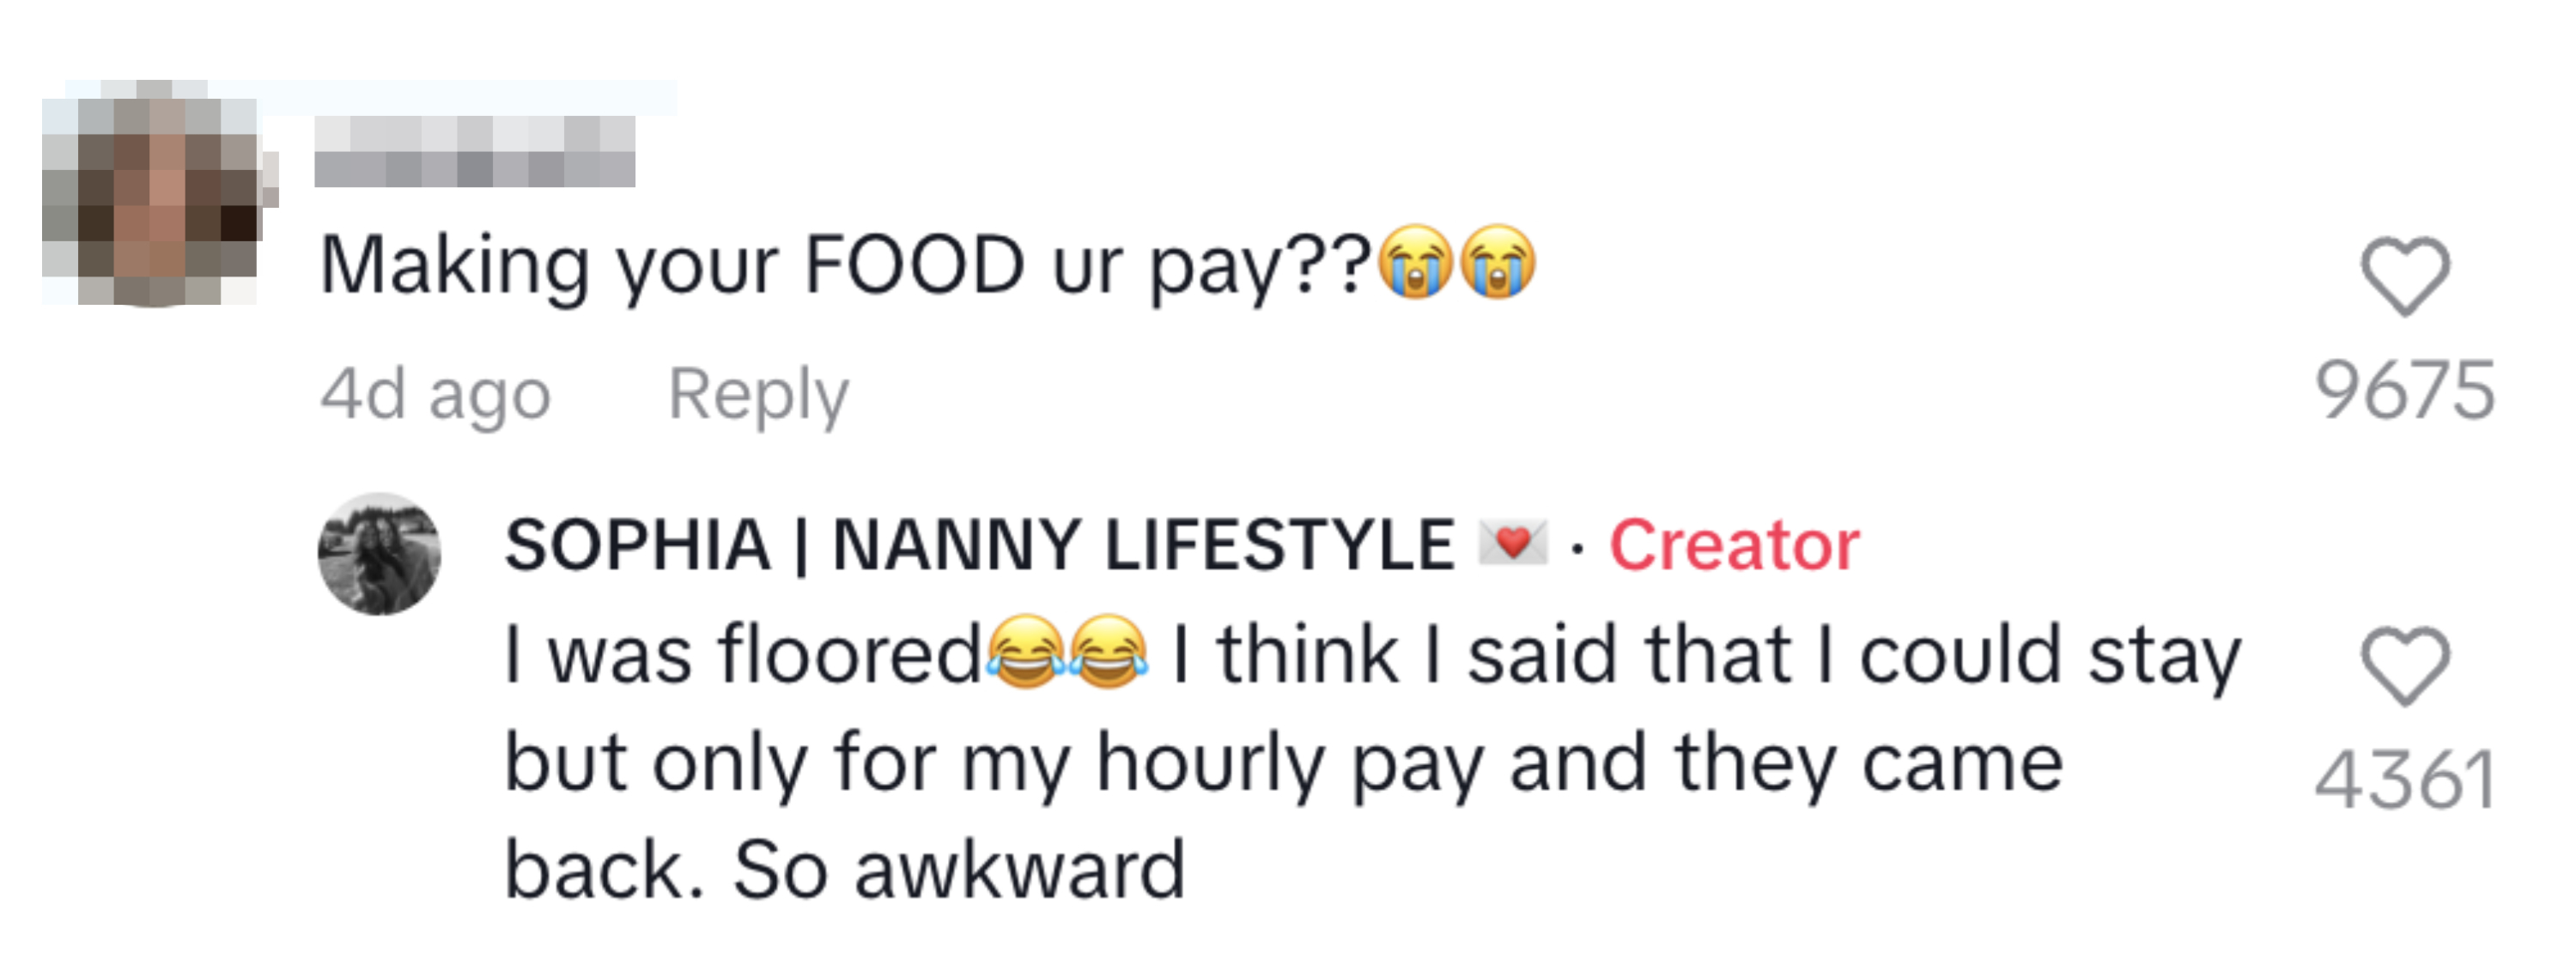 Two comments on a social media post, one from a user named Elizabeth reacting to the original post, and a response from the creator SOPHIA | NANNY LIFESTYLE